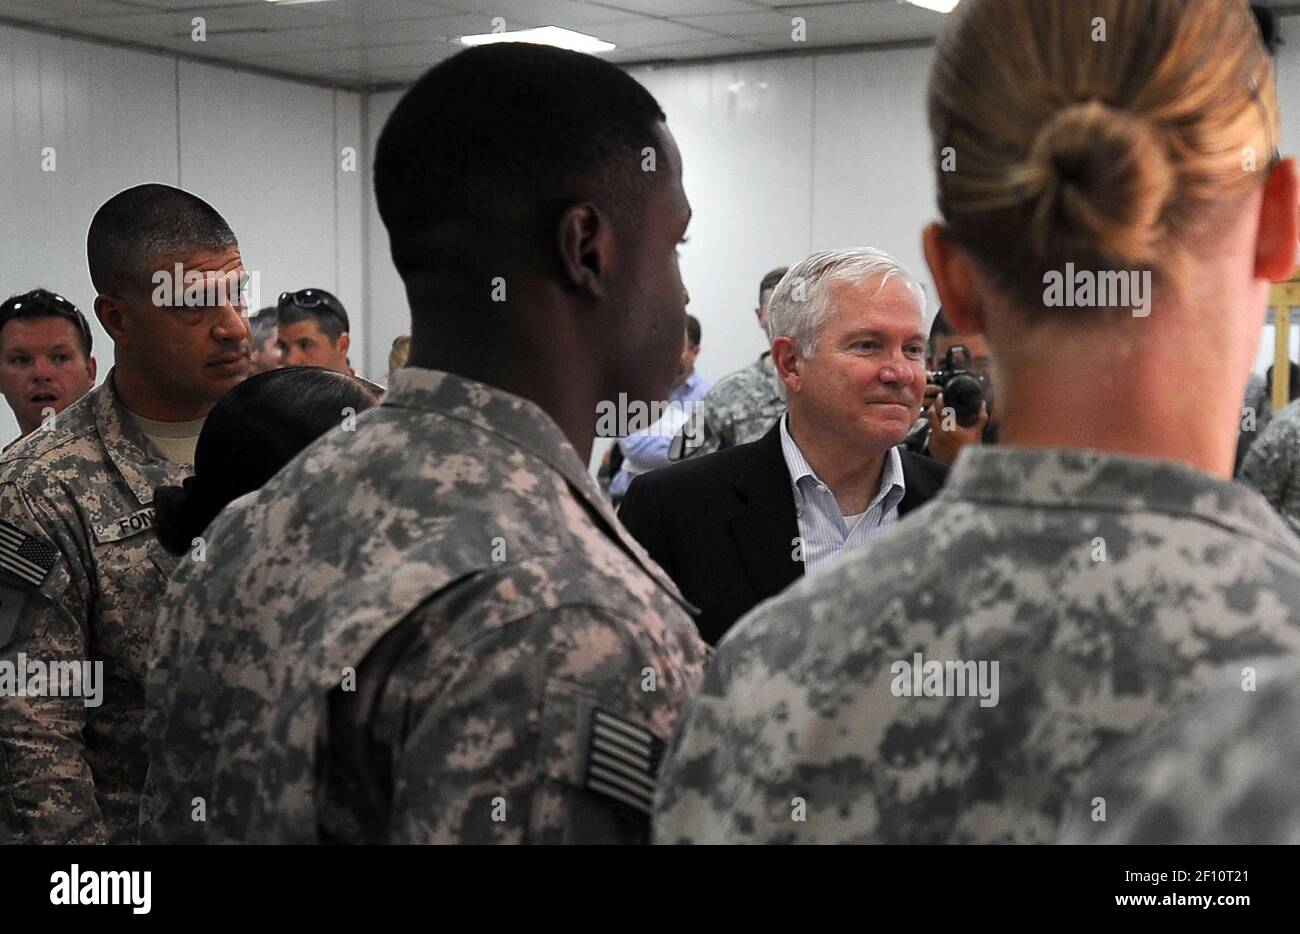 28 July 2009 - Baghdad, Iraq - U.S. Defense Secretary Robert M. Gates meets with troops and thanks them for their service at Combined Operating Base Adder during a recent trip to Iraq, July 28, 2009. Secretary Gates visited Iraq receiving operational updates as well as meeting with key Iraqi officials. Photo Credit: Jerry Morrison/DOD/Sipa Press/0907291737 Stock Photo